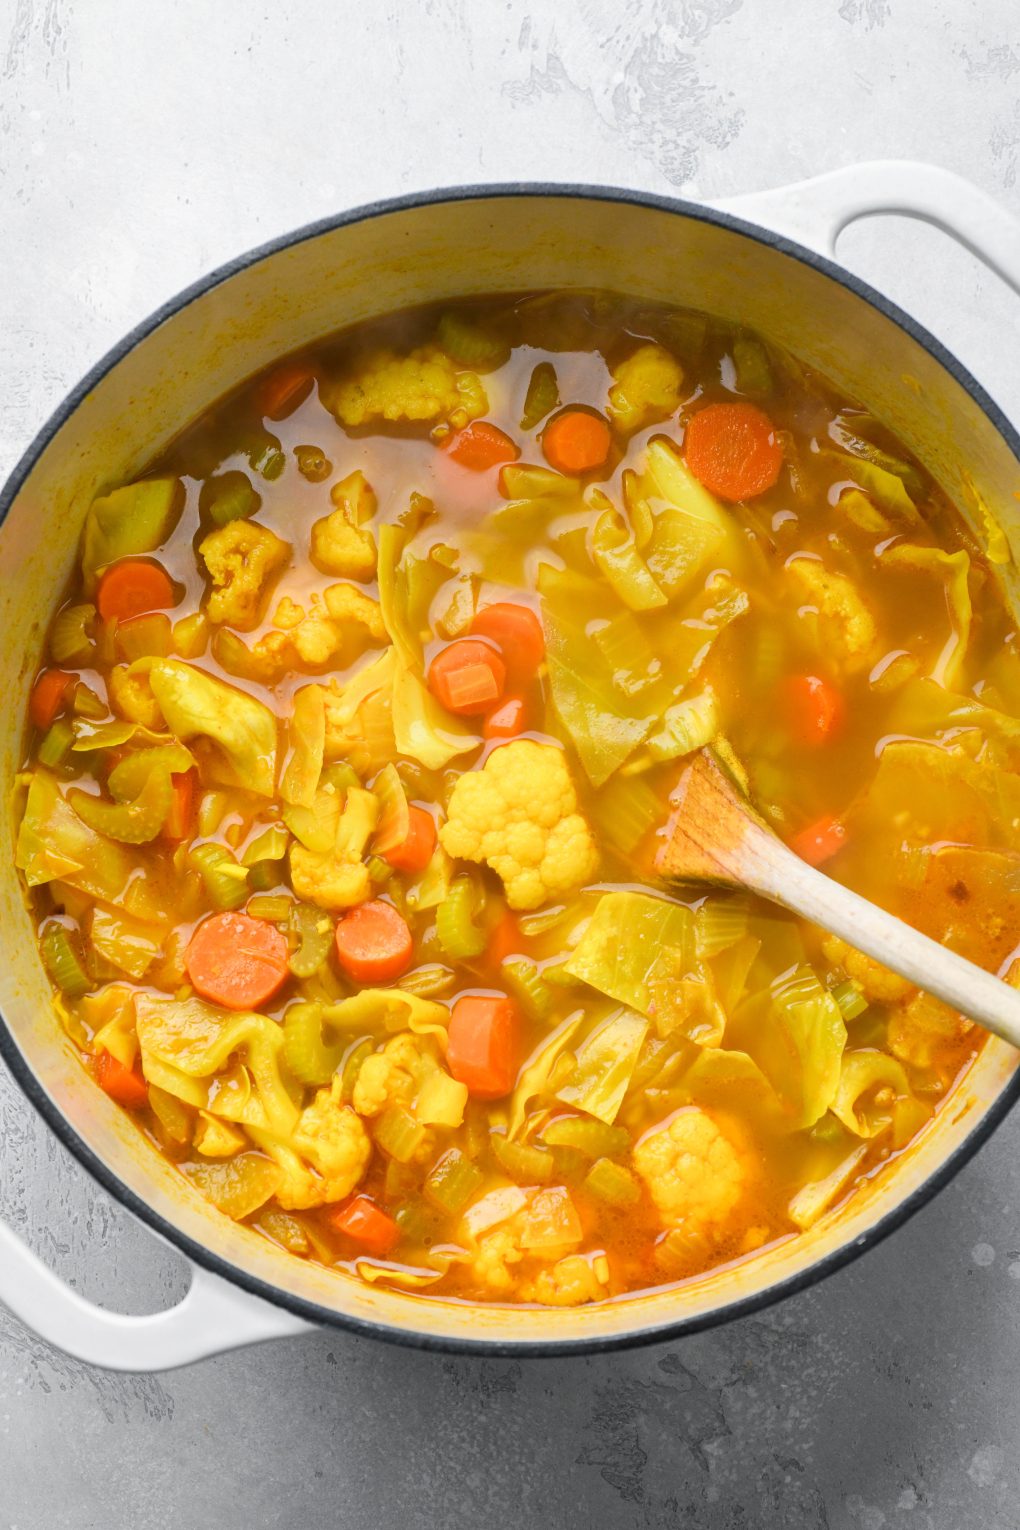 How to make anti inflammatory vegetable soup - Final soup simmered and reduced.